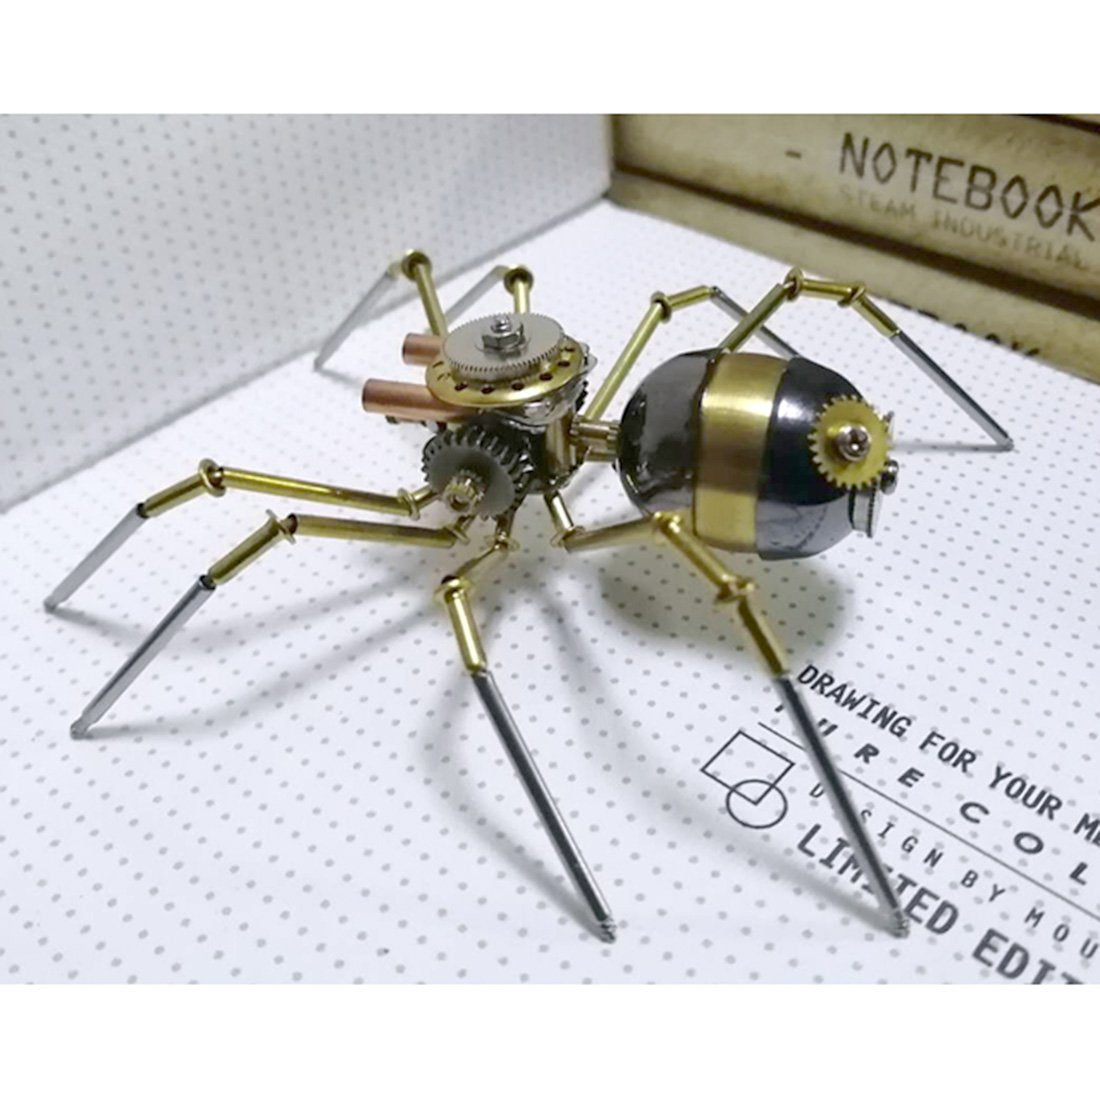 Steam Punk Metal Mechanical Little Wasp Spider Insects Model Crafts Collection